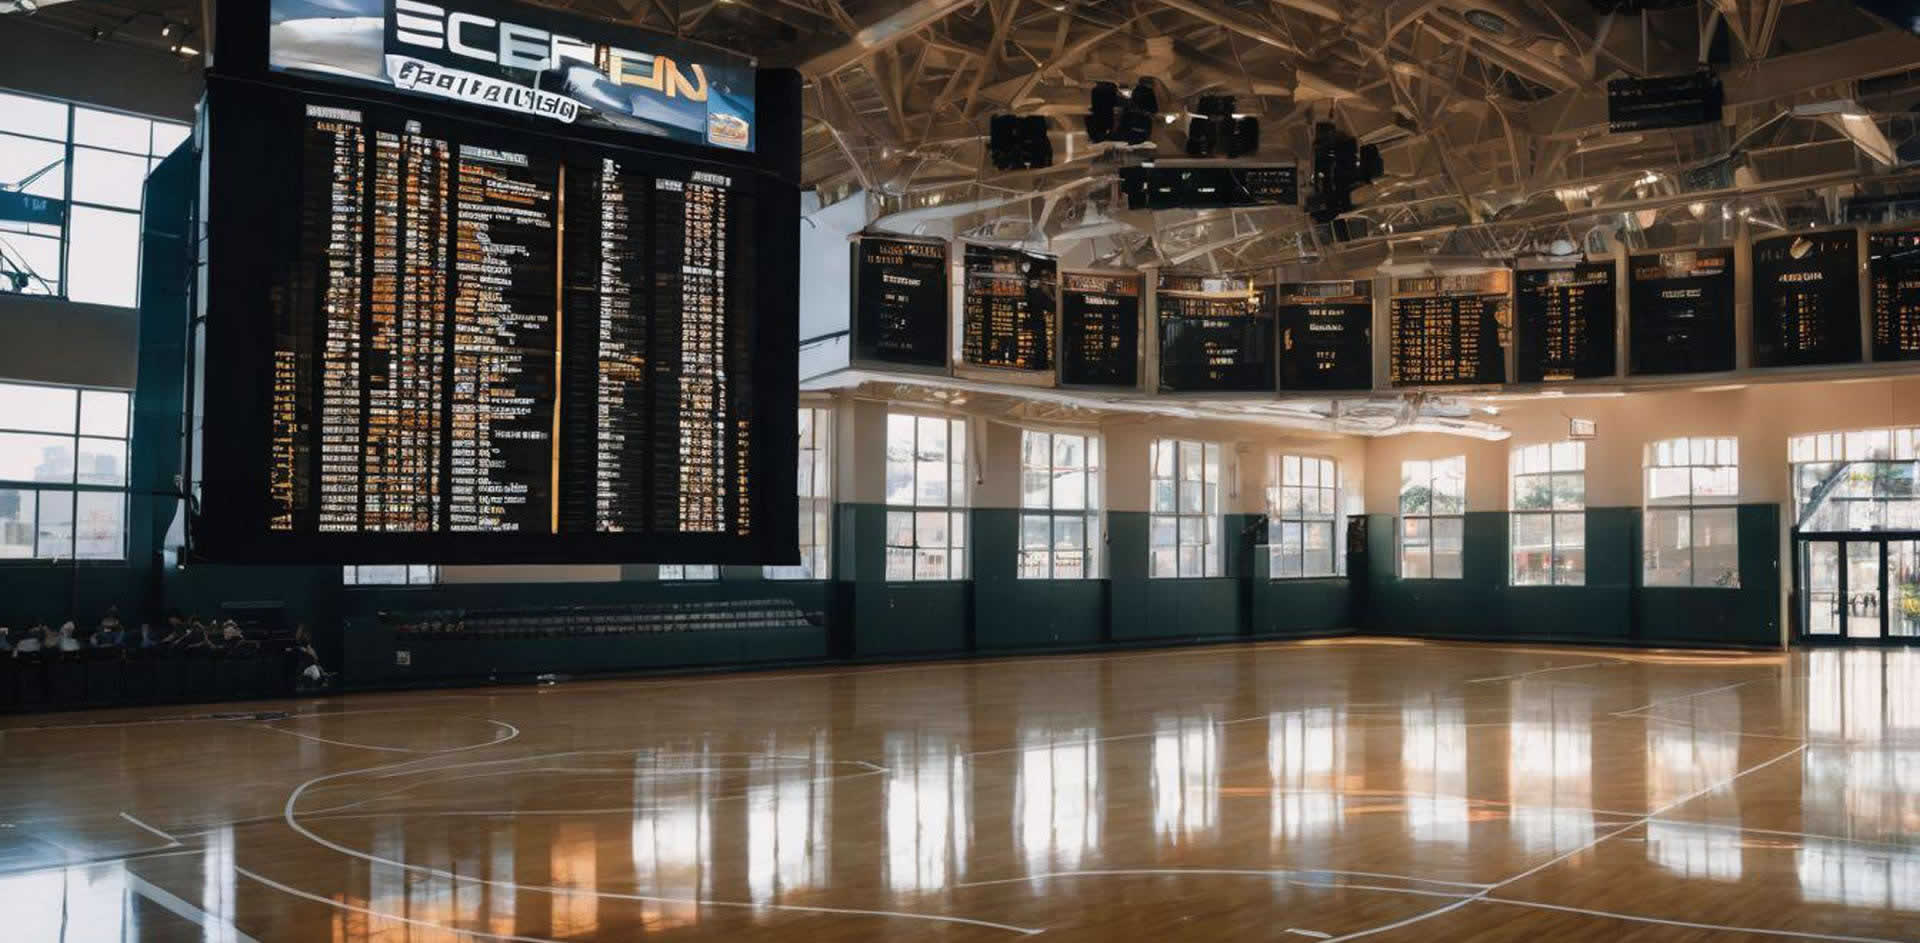 A basketball court with a scoreboard